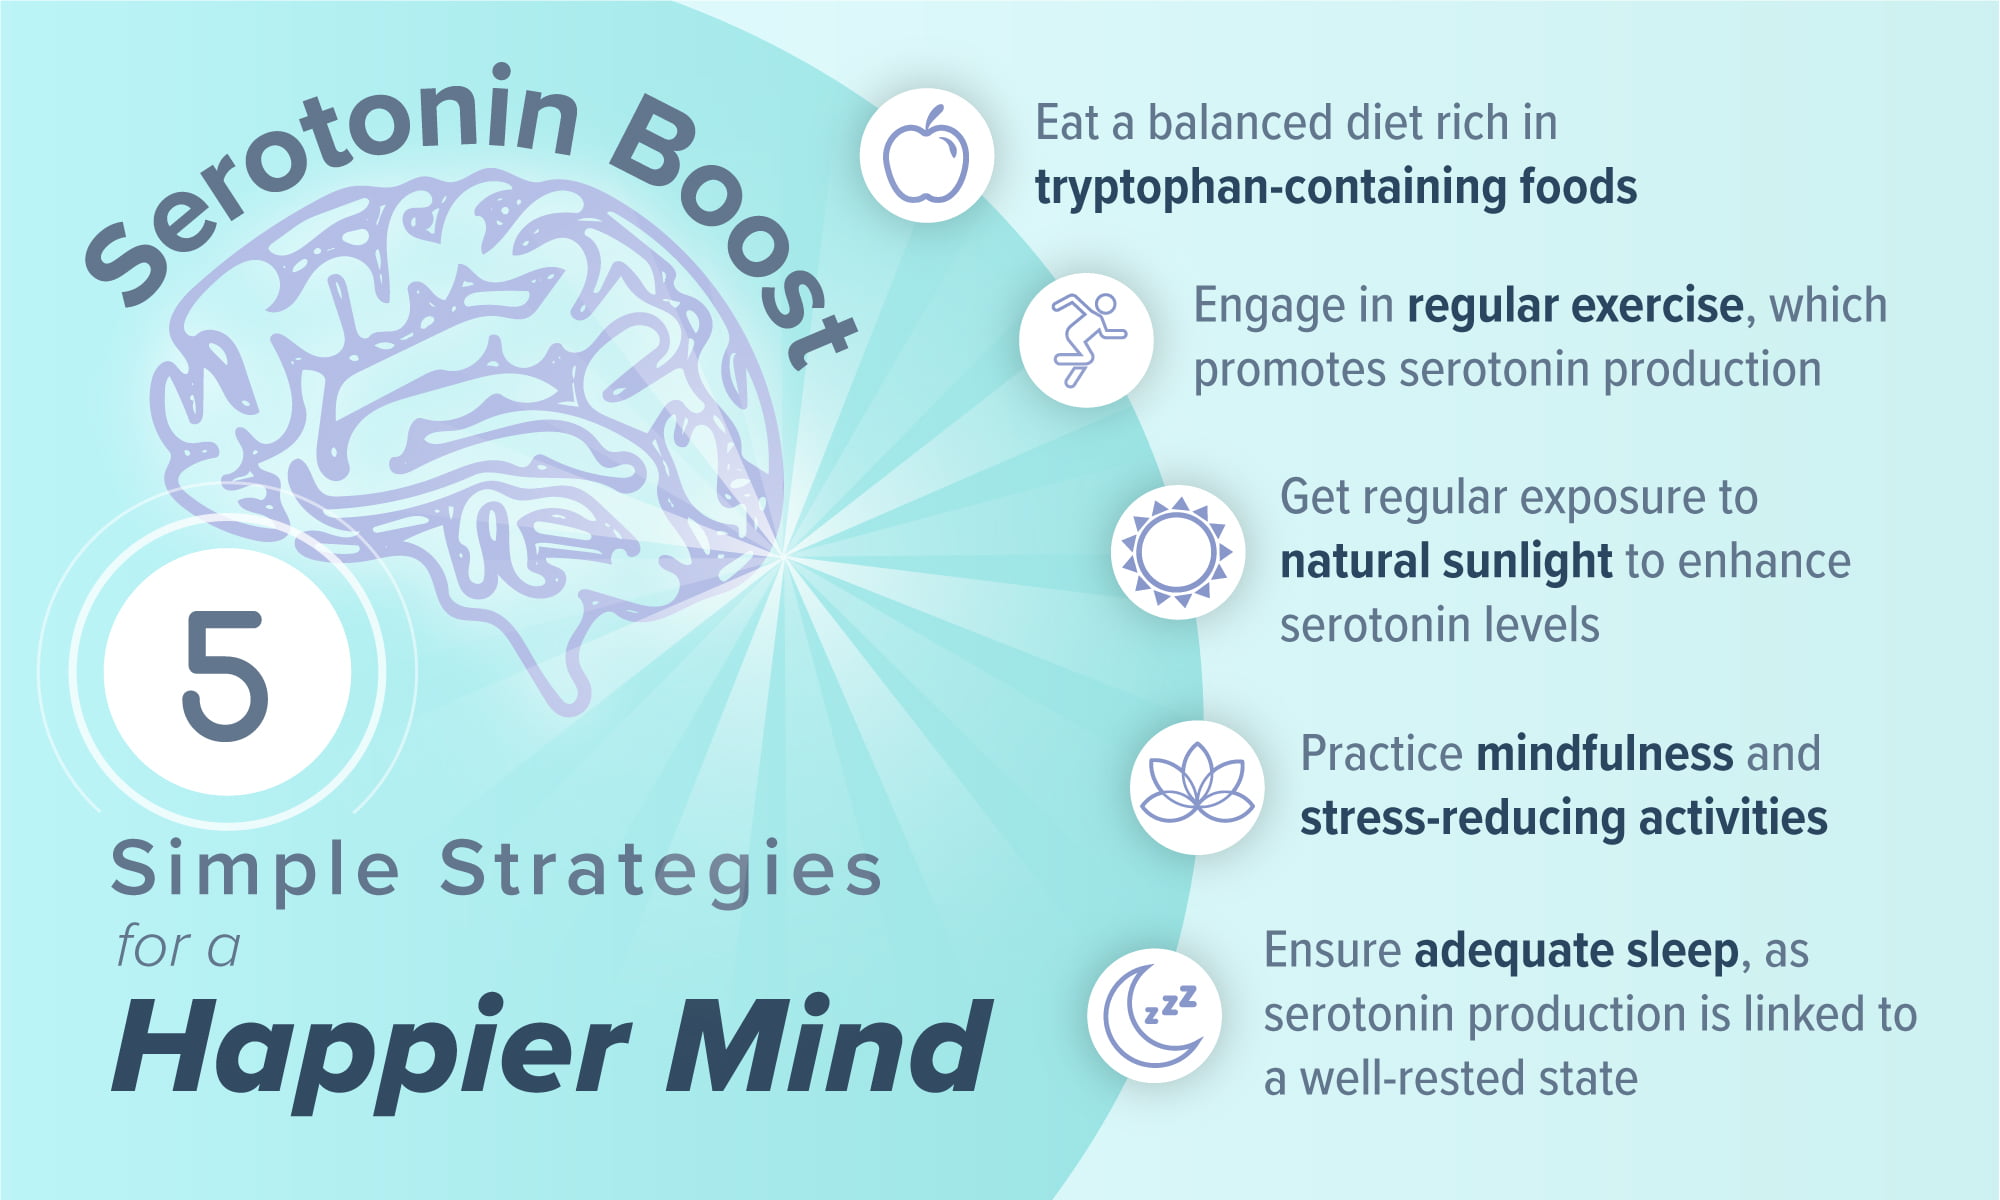 An infographic showcasing "5 Simple Strategies for a Happier Mind," including tips such as eating a balanced diet, engaging in regular exercise, getting regular exposure to sunlight, practicing mindfulness and stress-reducing activities, and ensuring adequate sleep.